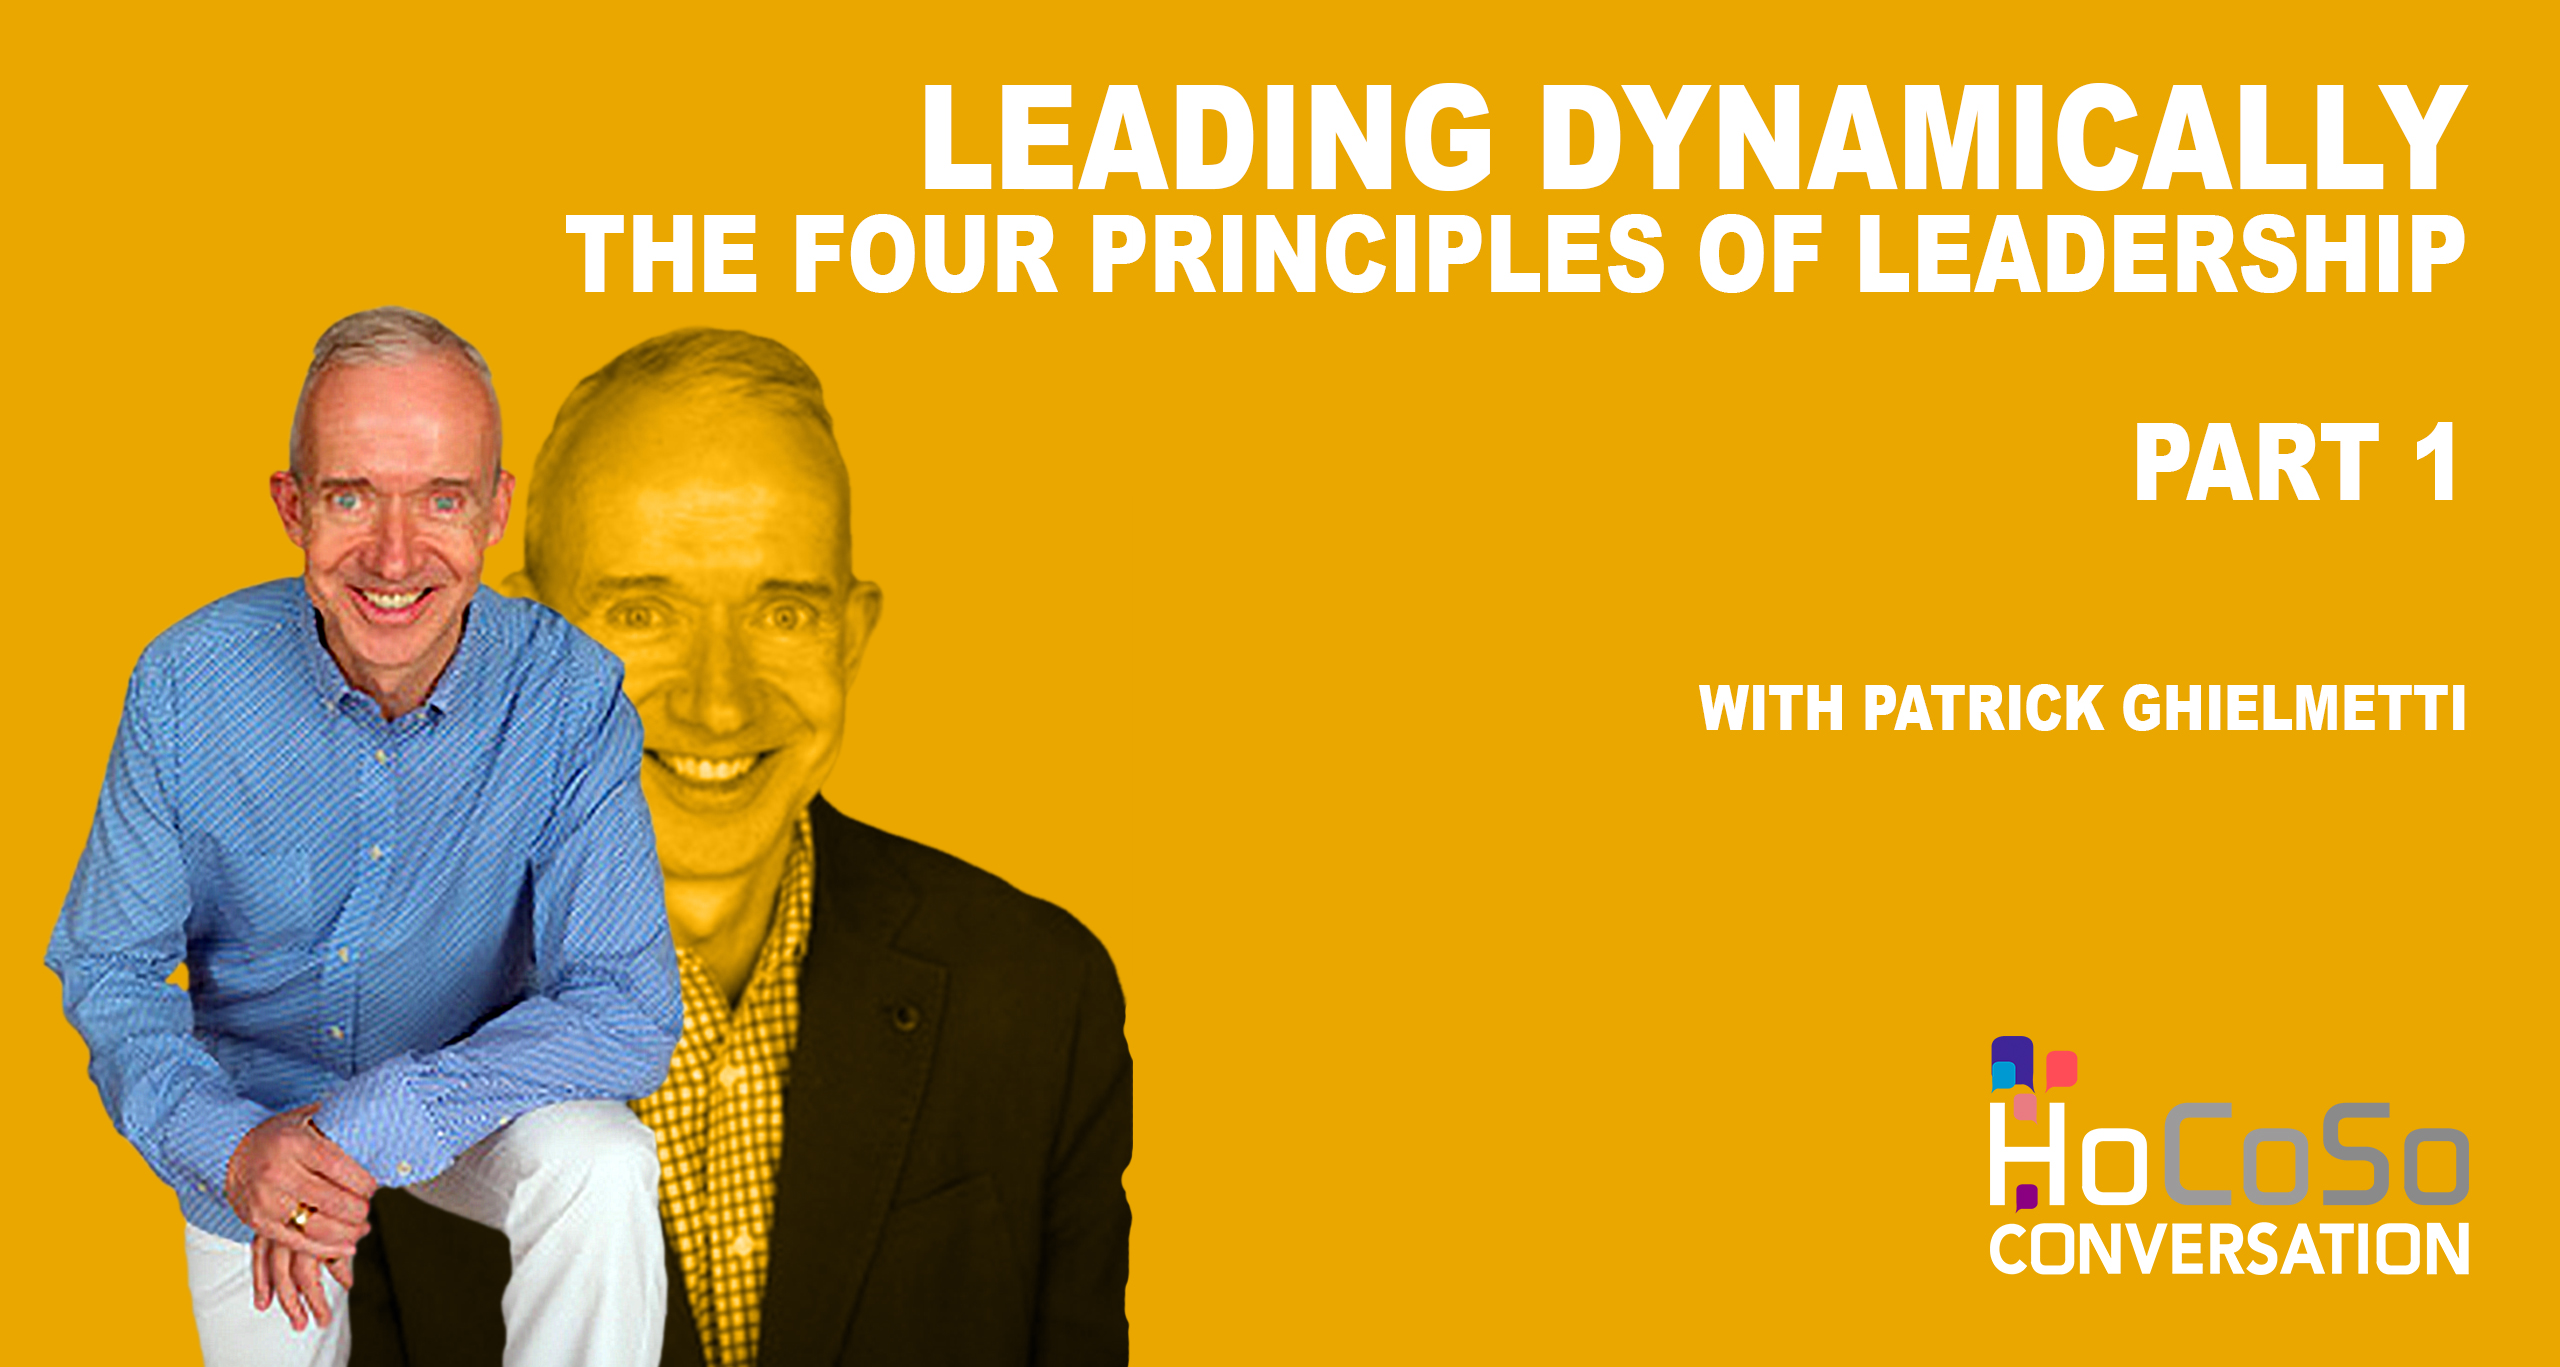 Leading Dynamically: The four principles of Leadership - Part 1 - Patrick Ghielmetti for HoCoSo CONVERSATION